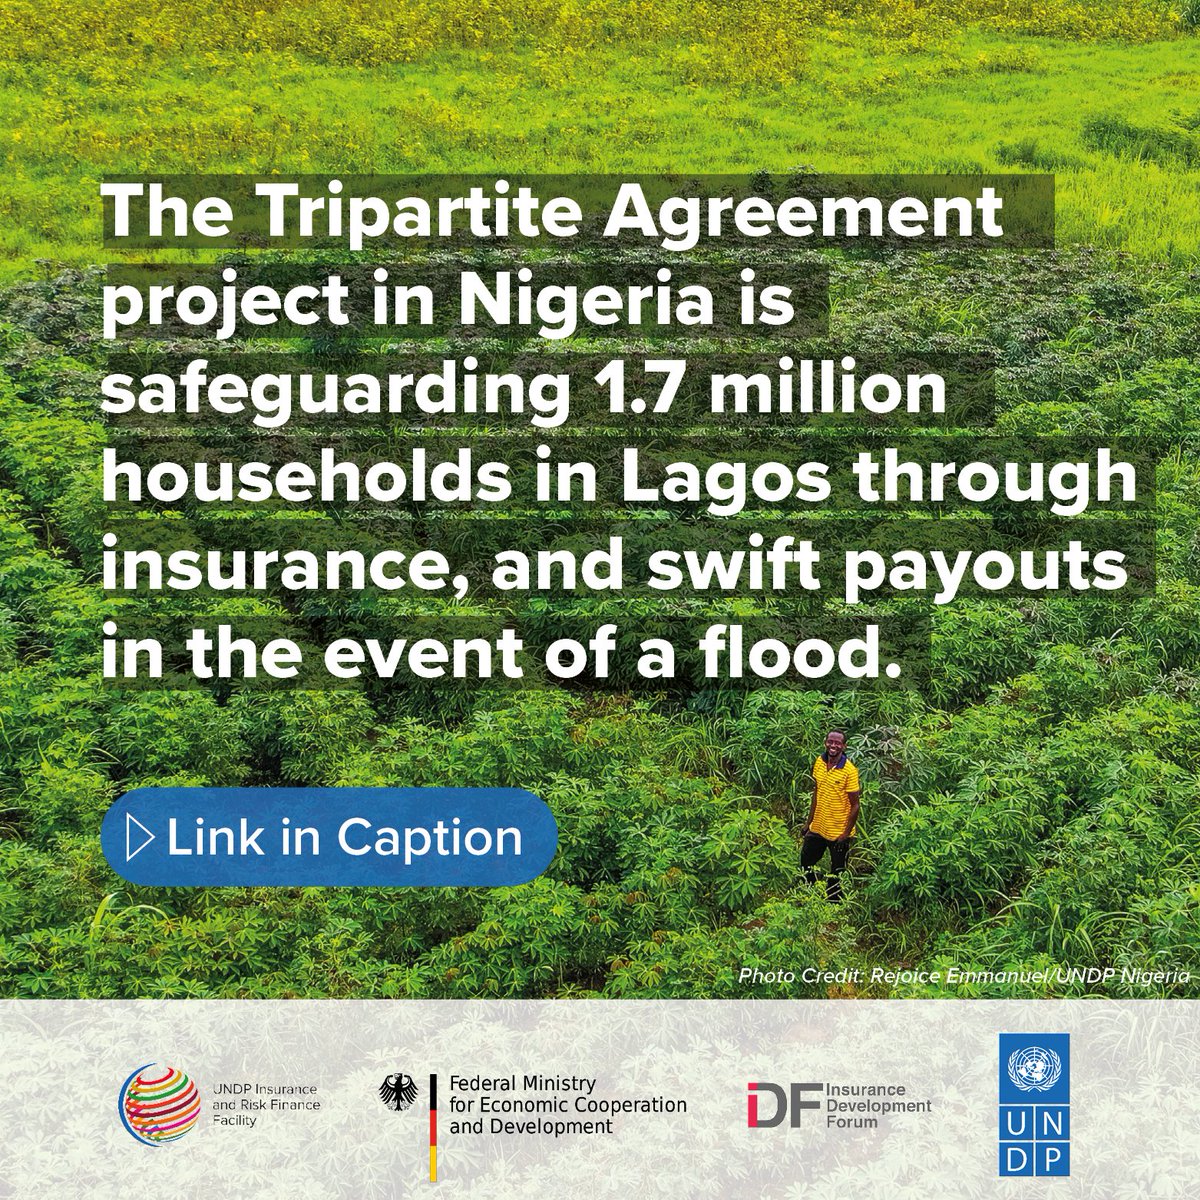 🛟🇳🇬 Read the Tripartite Agreement Overview and discover how it founded an innovative insurance program with the Lagos State Government in Nigeria to financially protect 1.7 million households against impacts of urban floods➡️ irff.exposure.co/undps-insuranc…